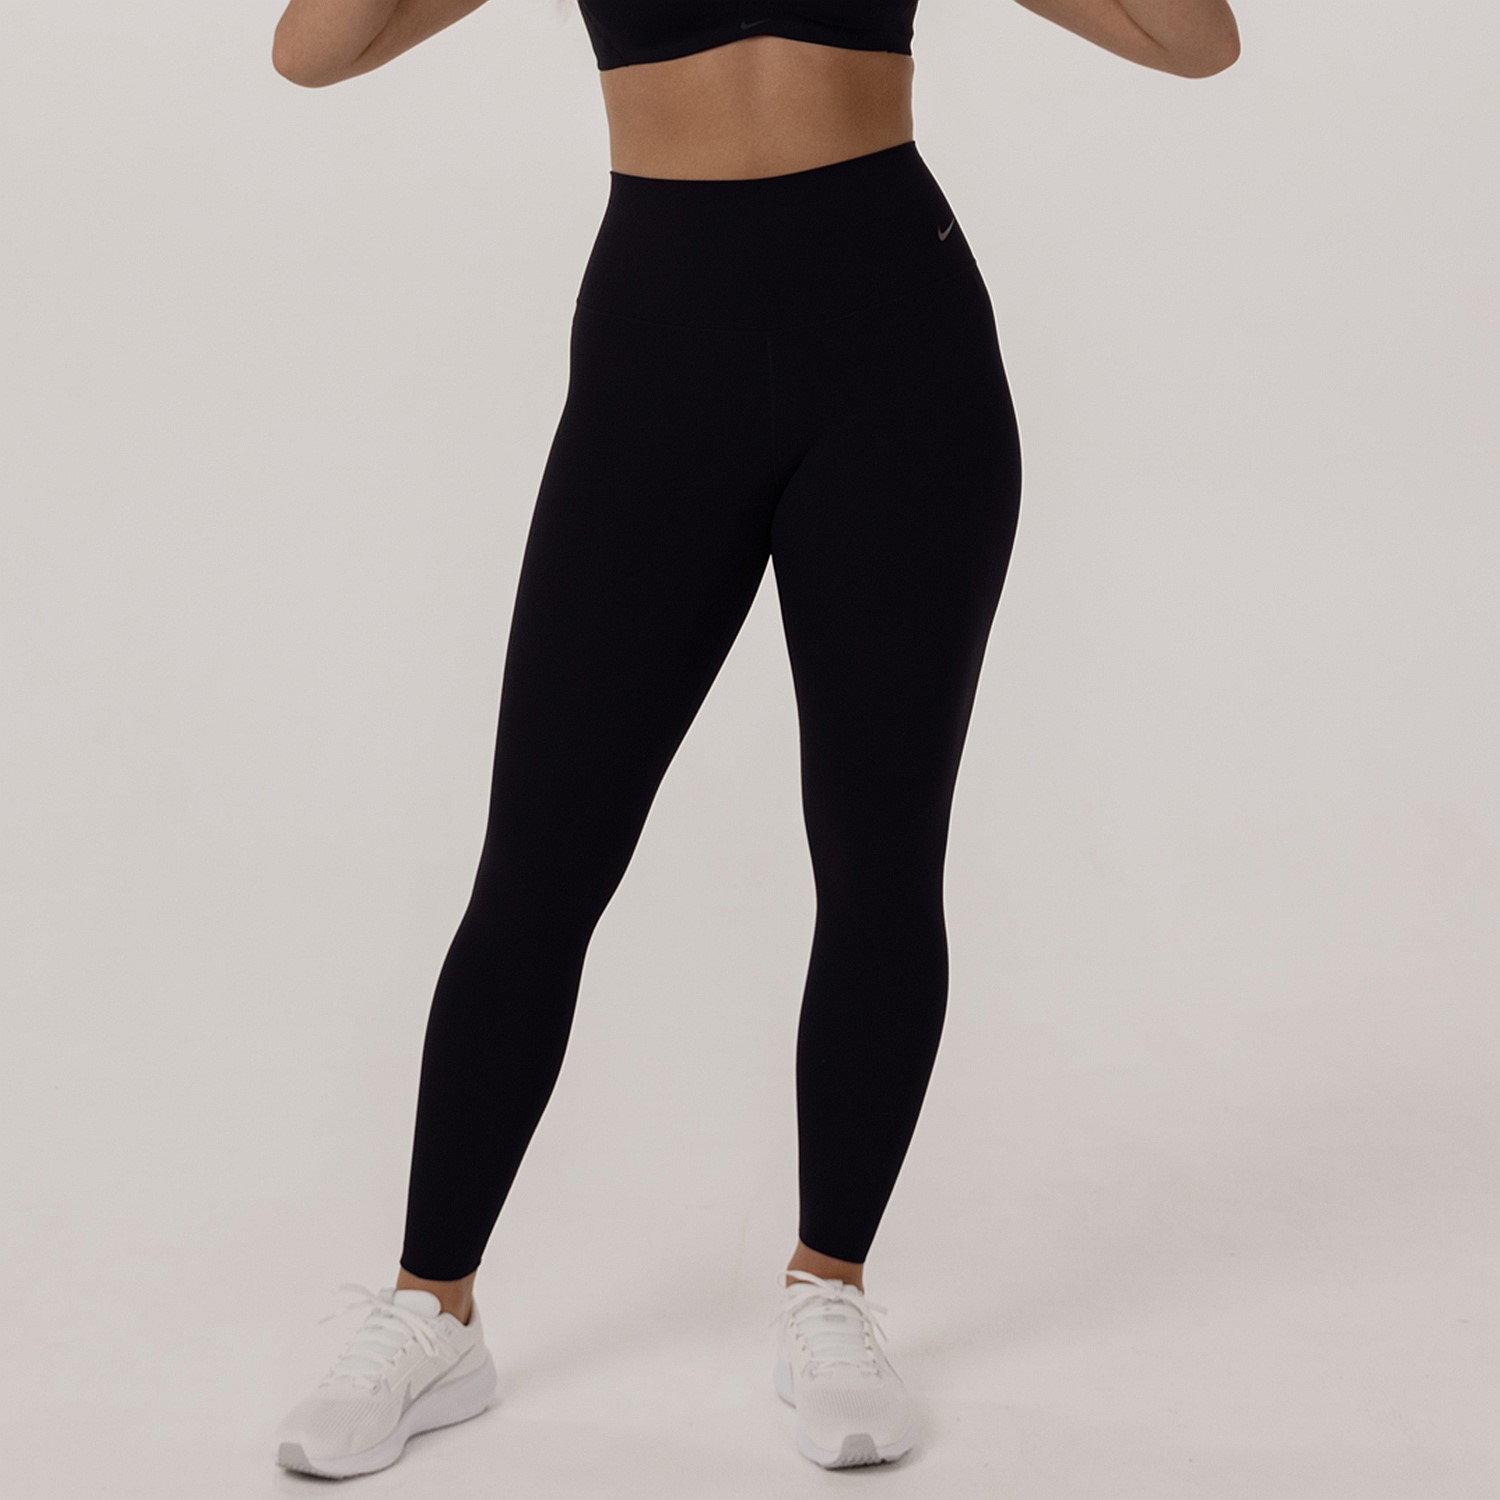 Boxing Day - Zenvy Gentle Support High-Waisted 7/8 Leggings